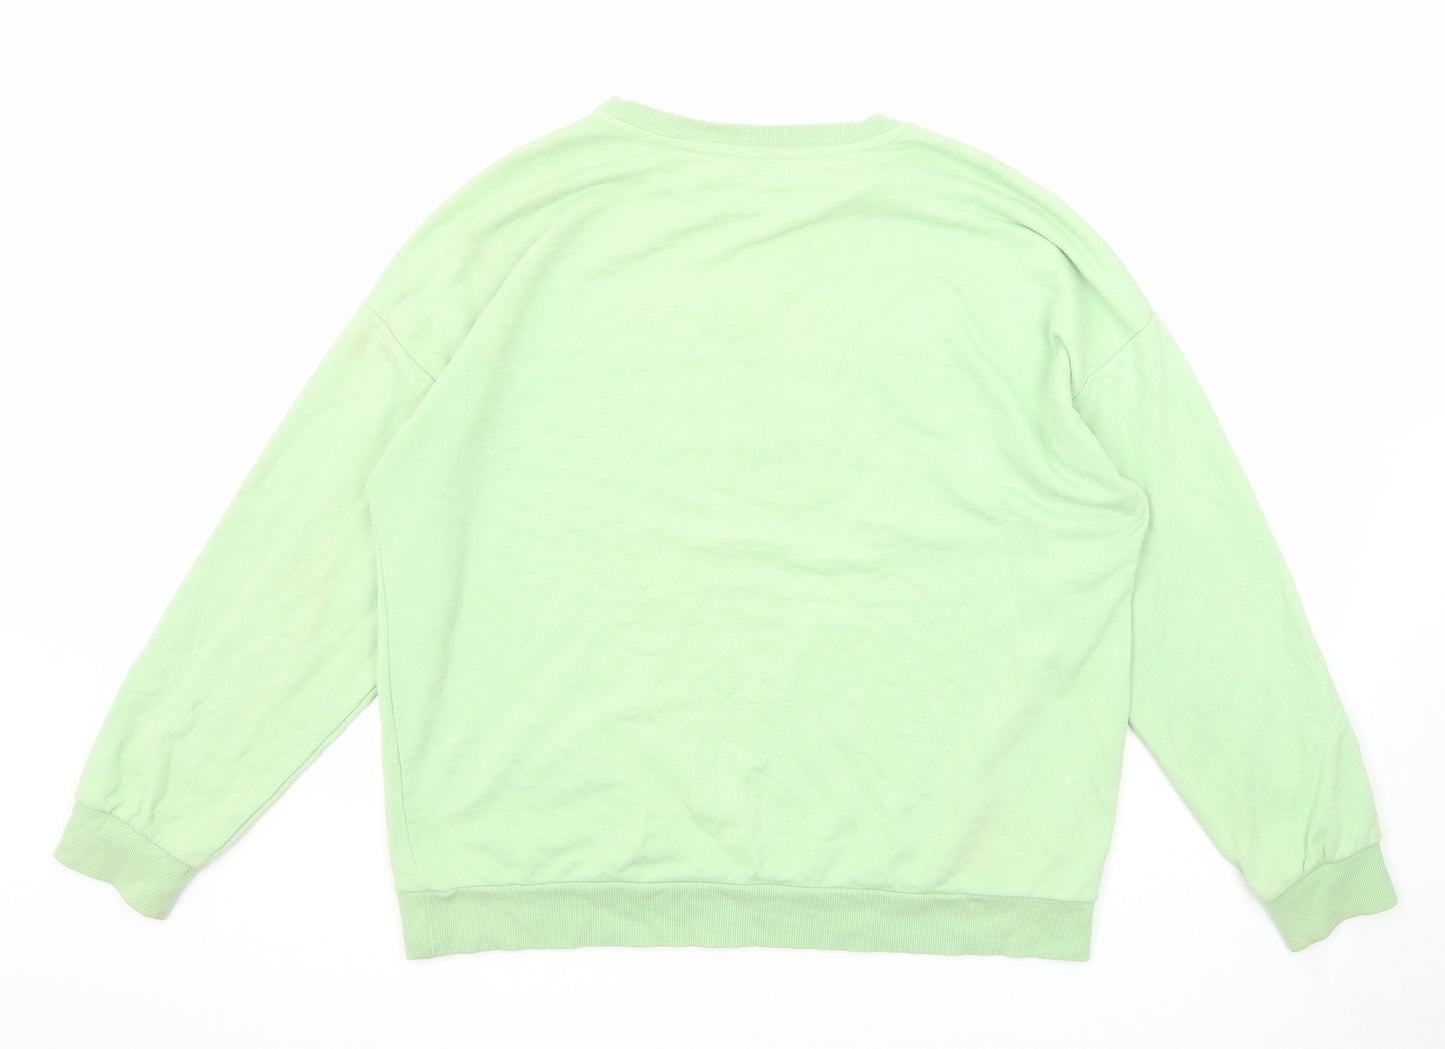 NEXT Womens Green Cotton Pullover Sweatshirt Size L Pullover - St.Ives 1982